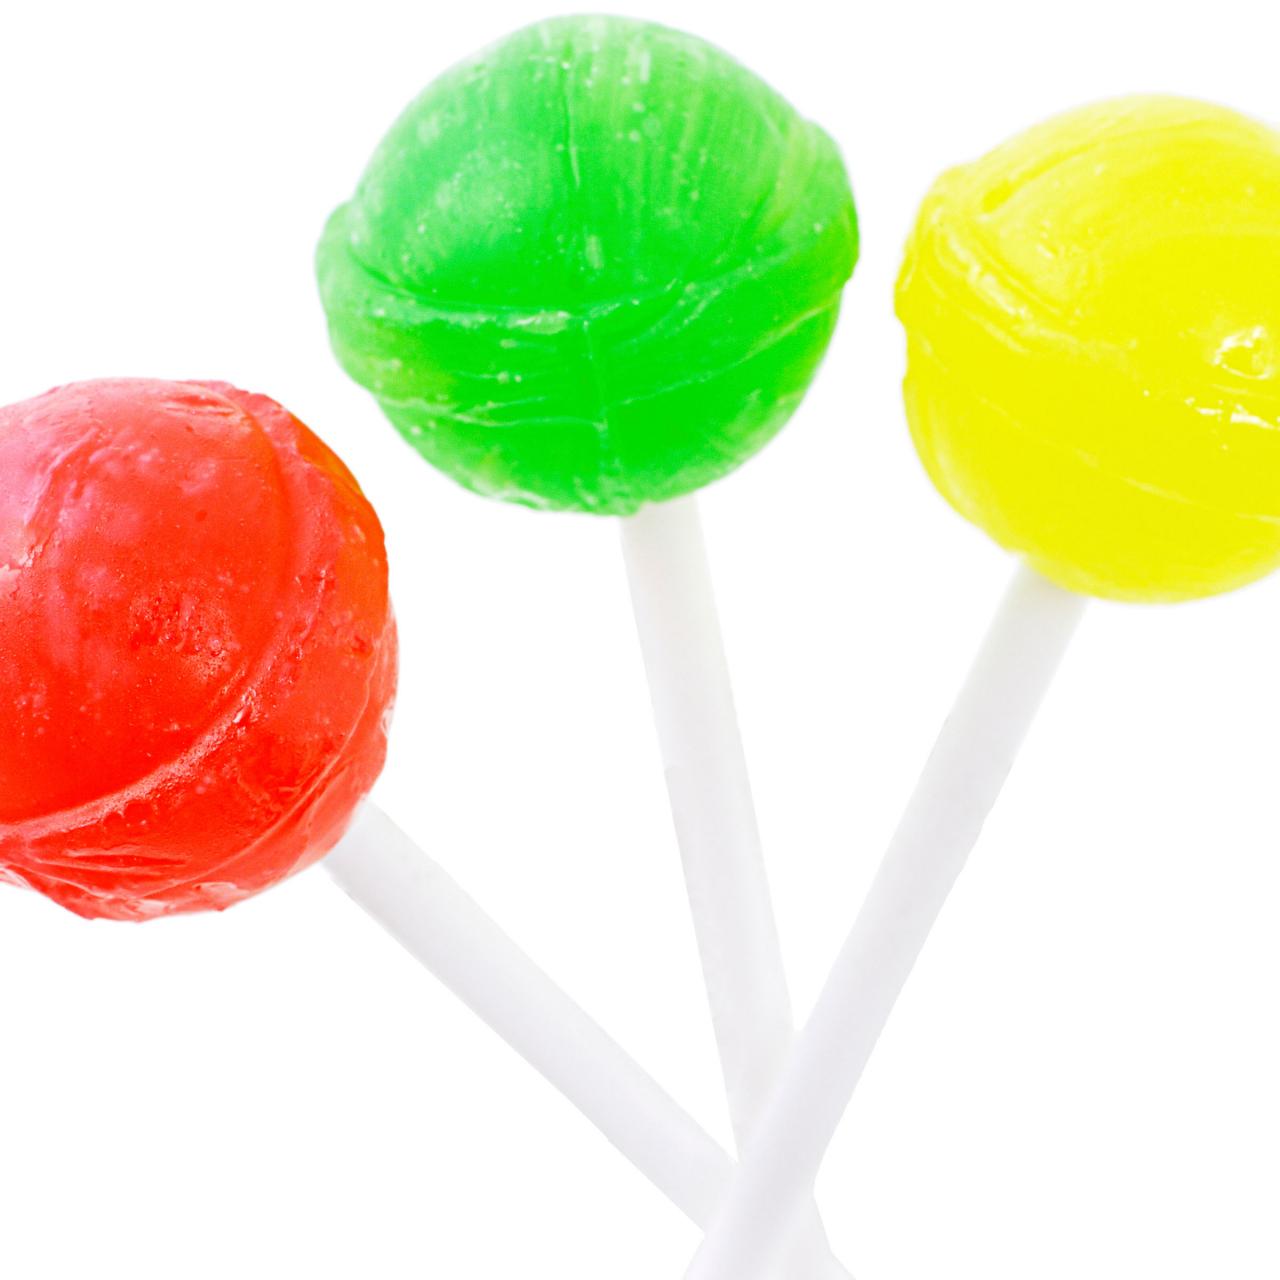 Definition & Meaning of Lollipop